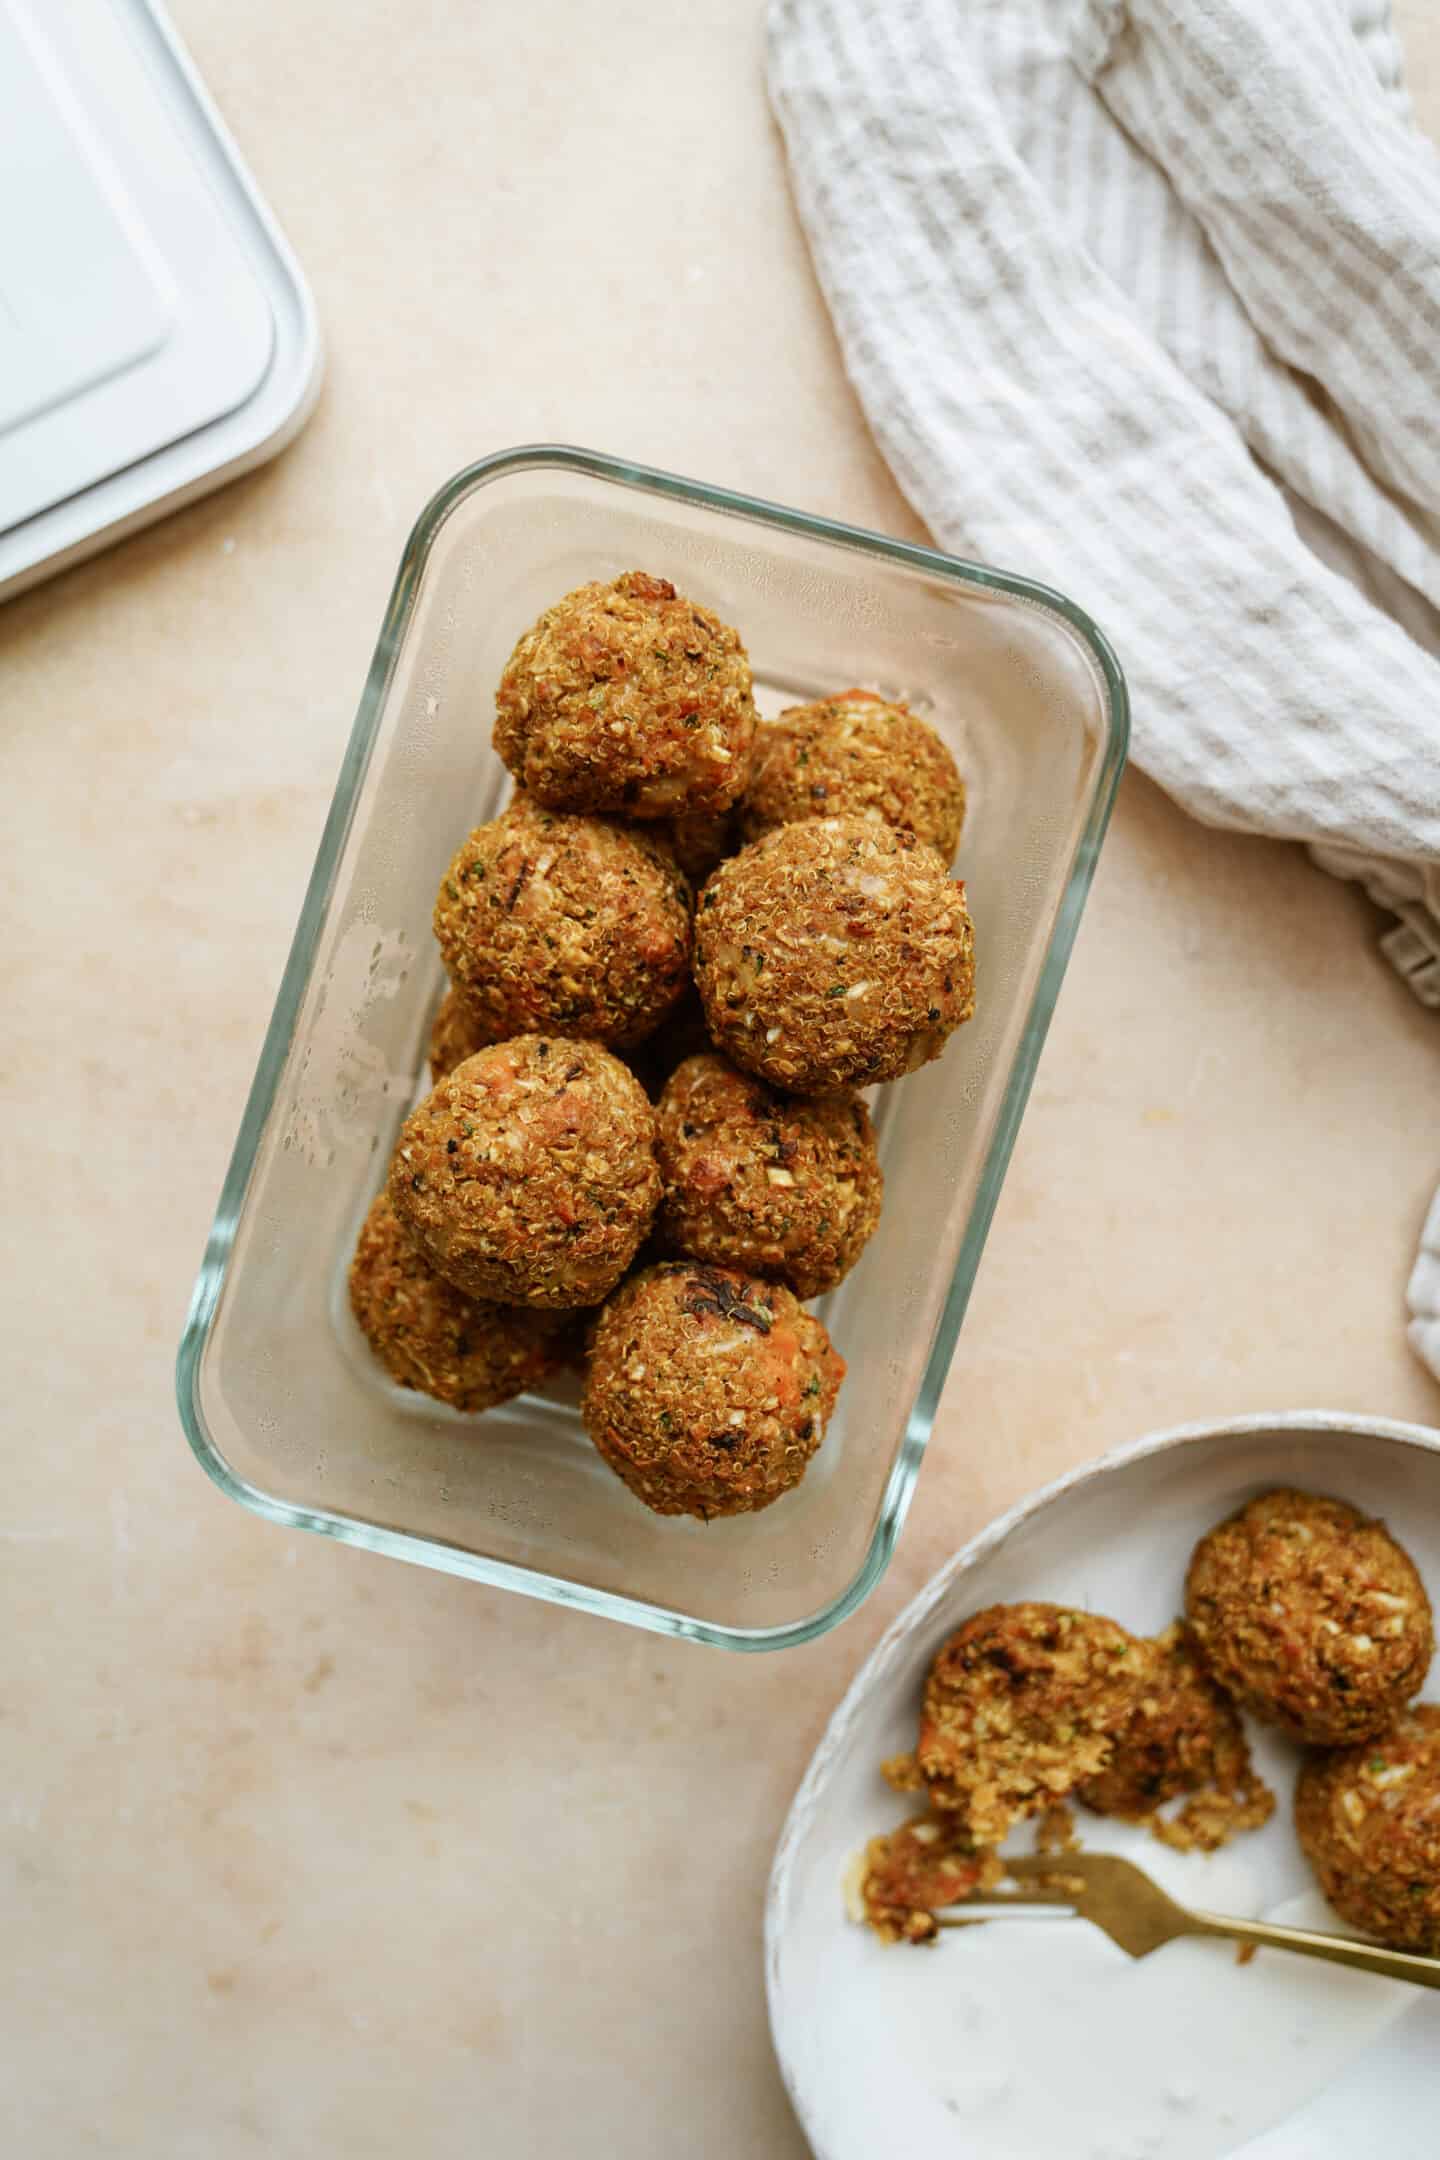 Sweet potato balls with quinoa in a serving dish